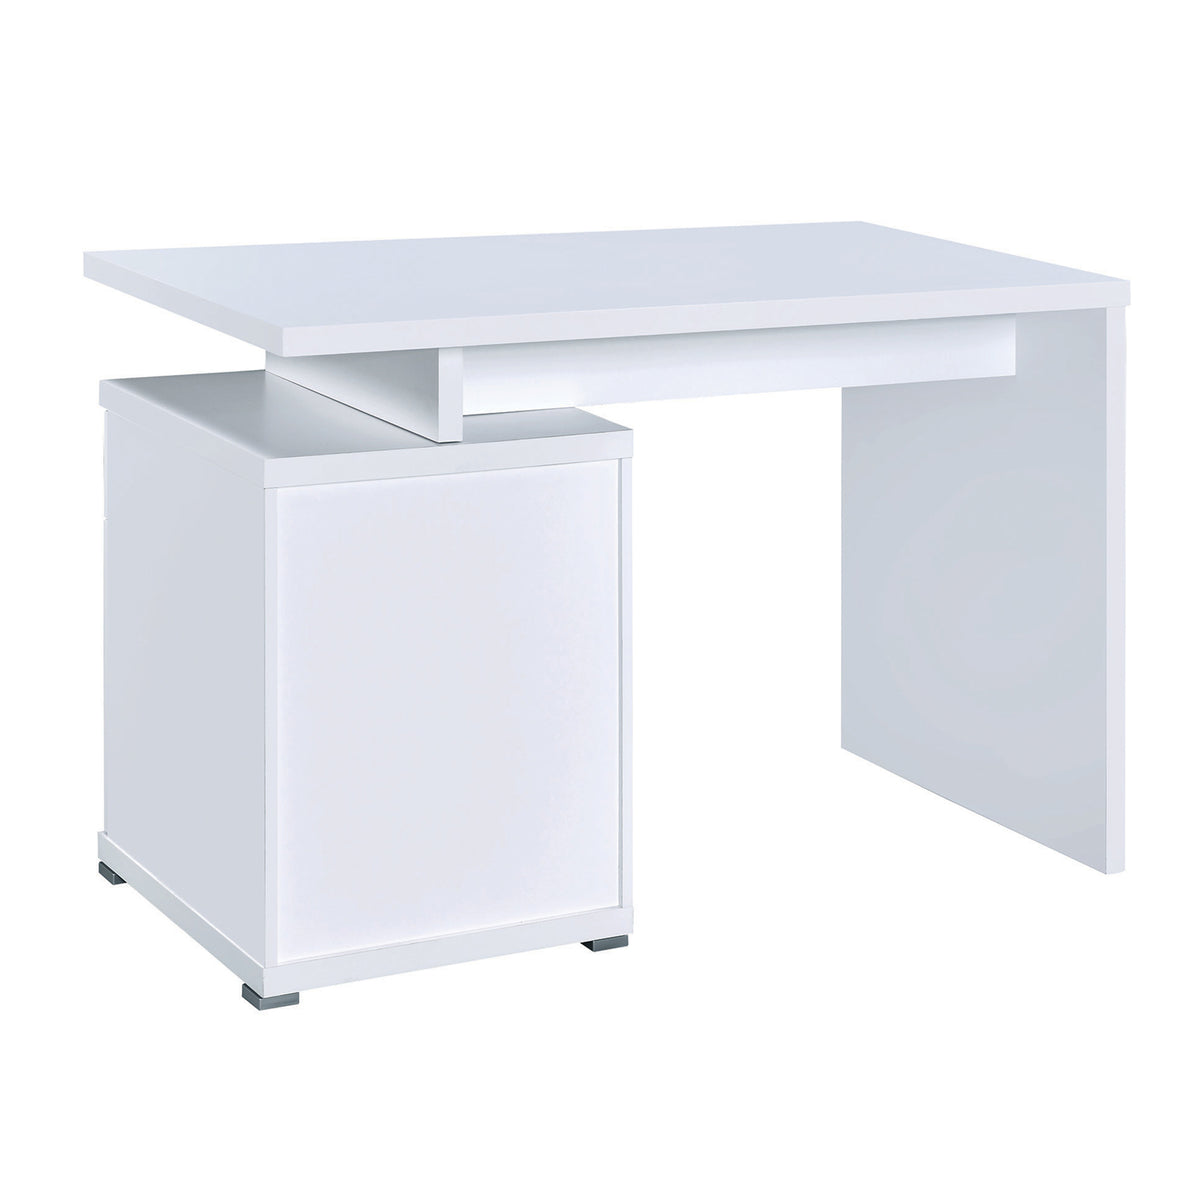 BM156222 Gorgeous white Wooden desk with cabinet